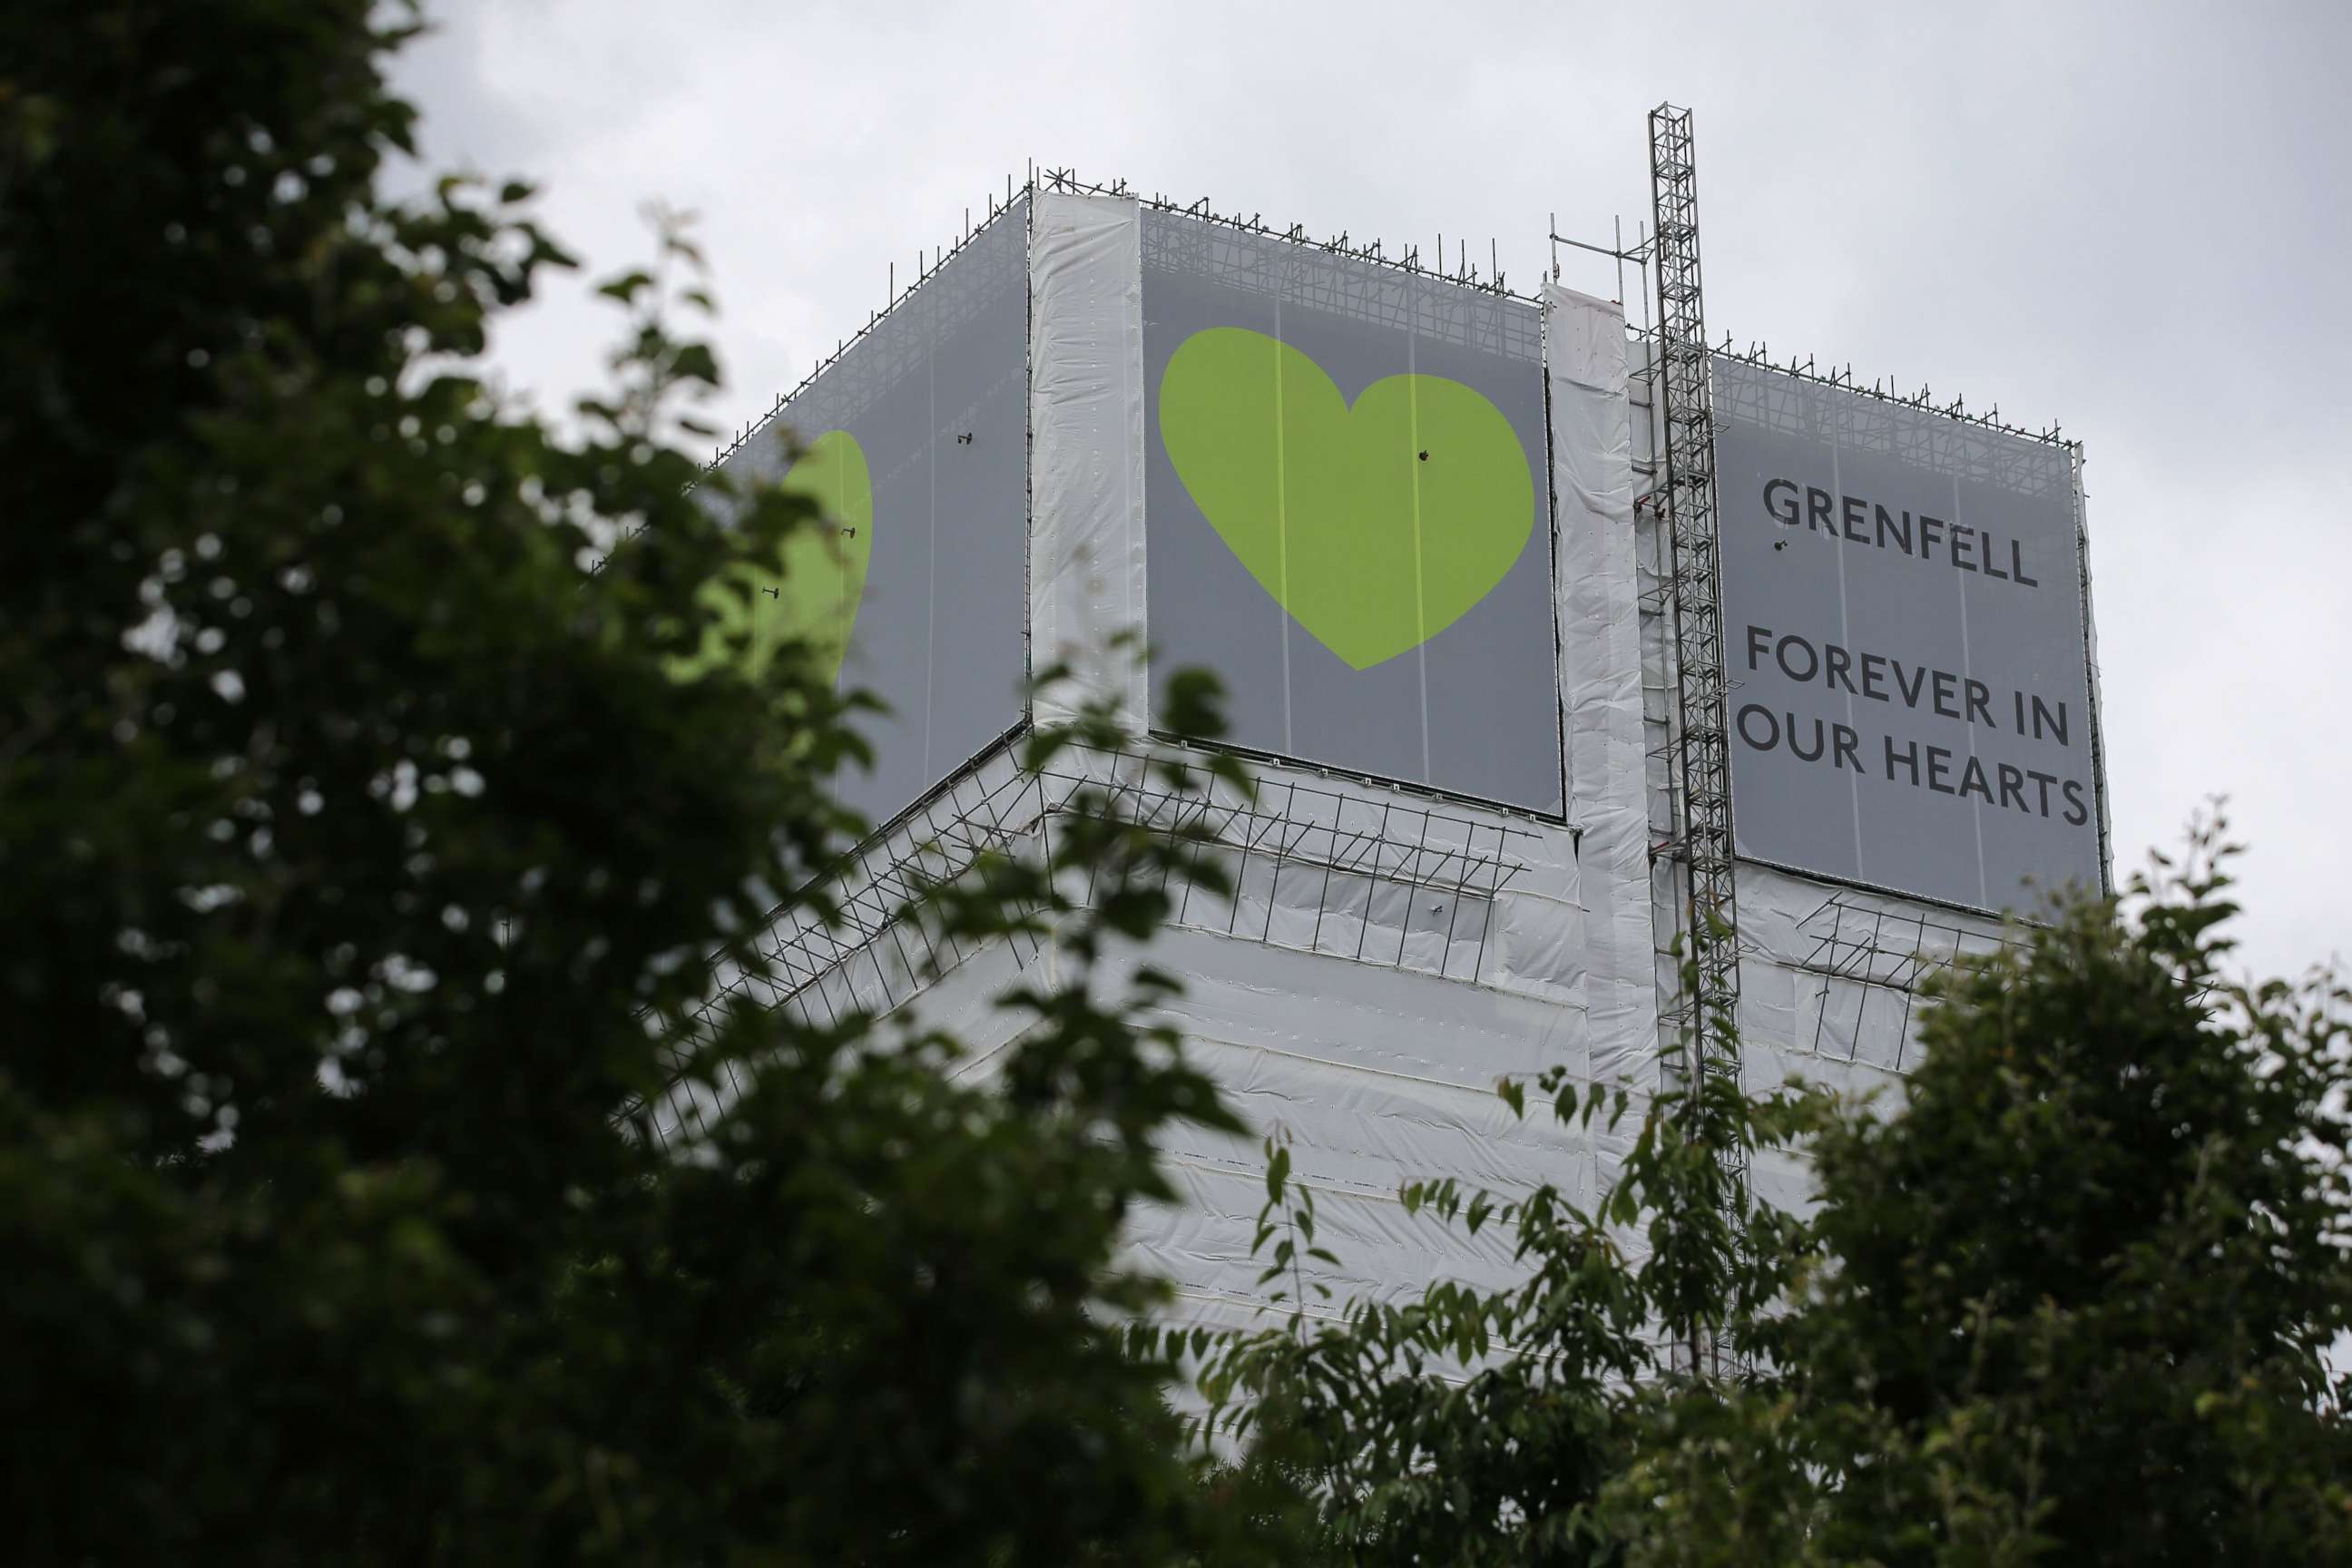 PHOTO: A sign in support of the victims of the Grenfell fire covers Grenfell Tower near Ladbroke Grove, west London on June 13, 2018.